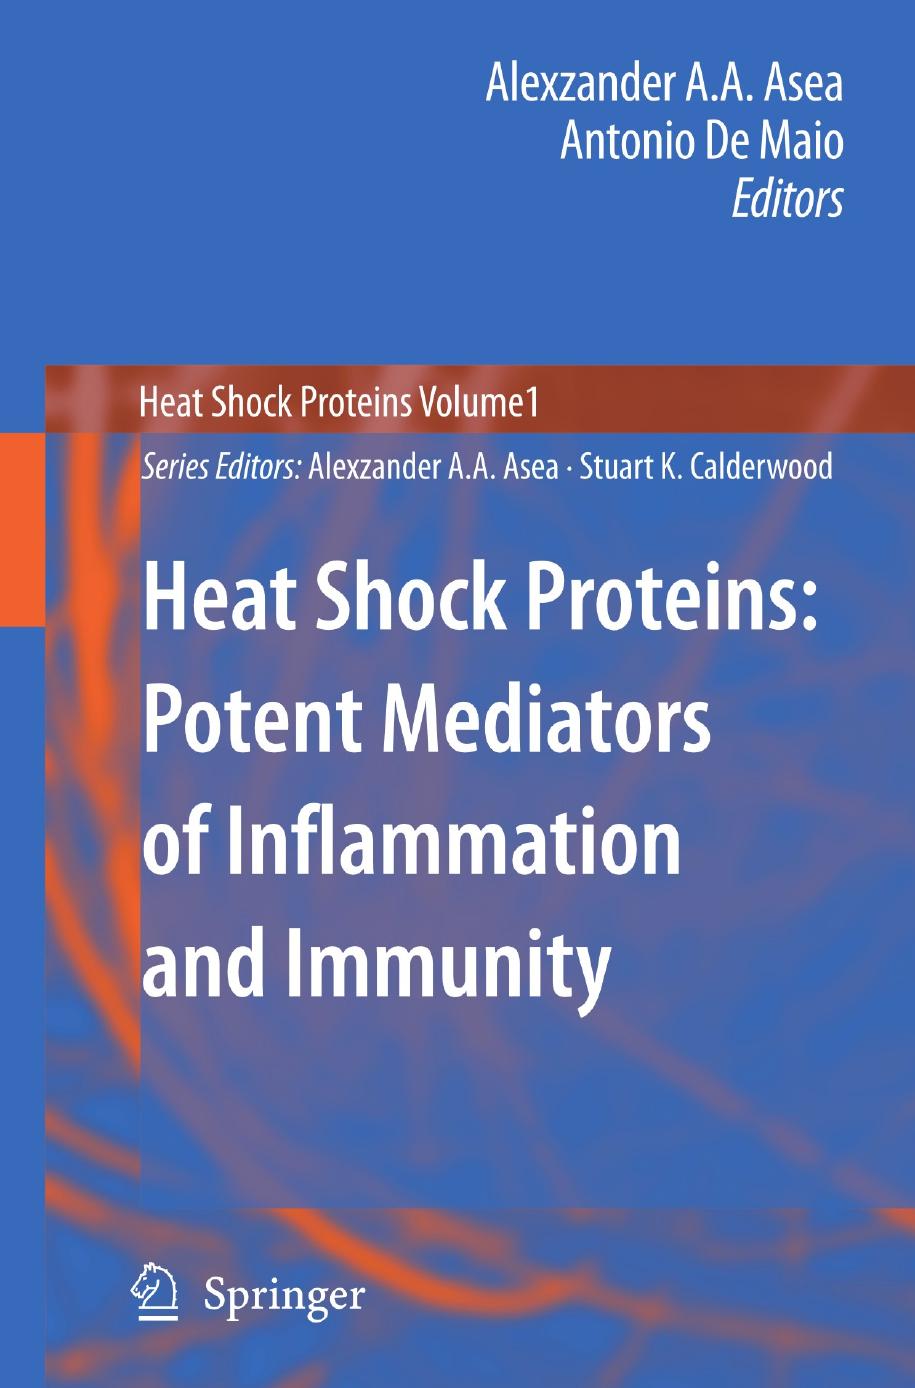 Heat Shock Proteins Potent Mediators of Inflammation and Immunity 2007